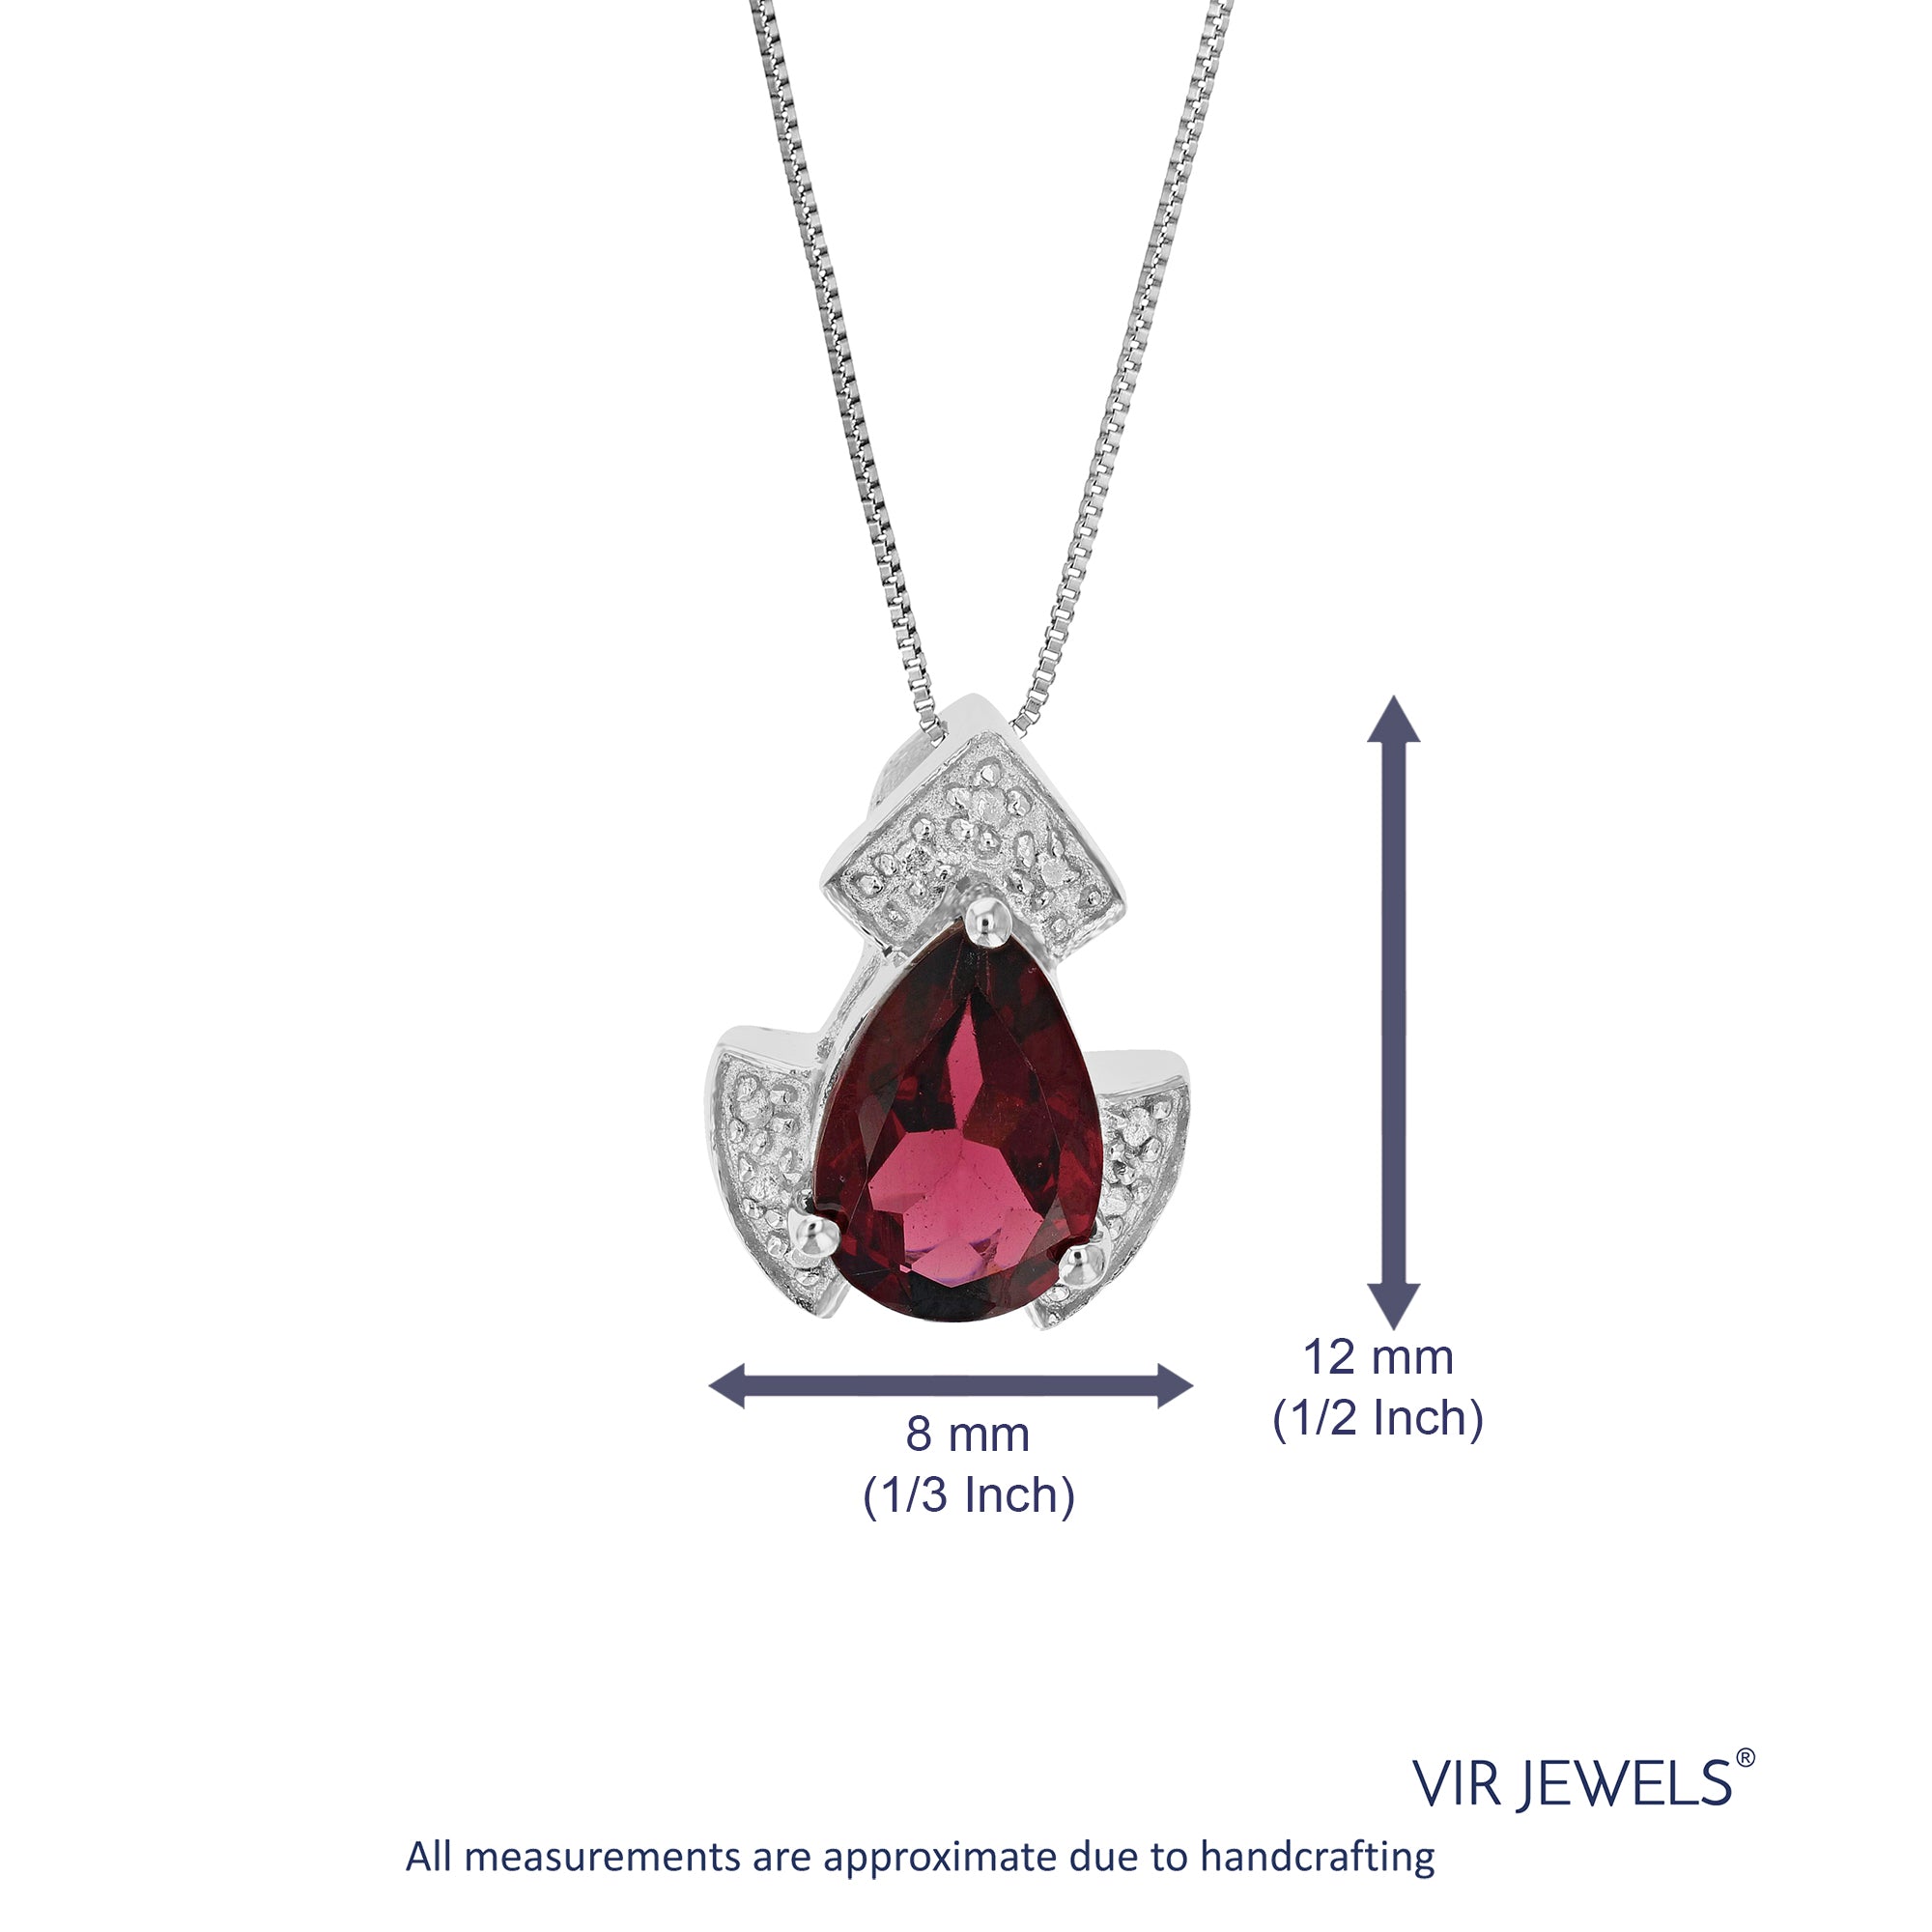 1.10 cttw Pendant Necklace, Garnet Pear Shape Pendant Necklace for Women in .925 Sterling Silver with Rhodium, 18 Inch Chain, Prong Setting